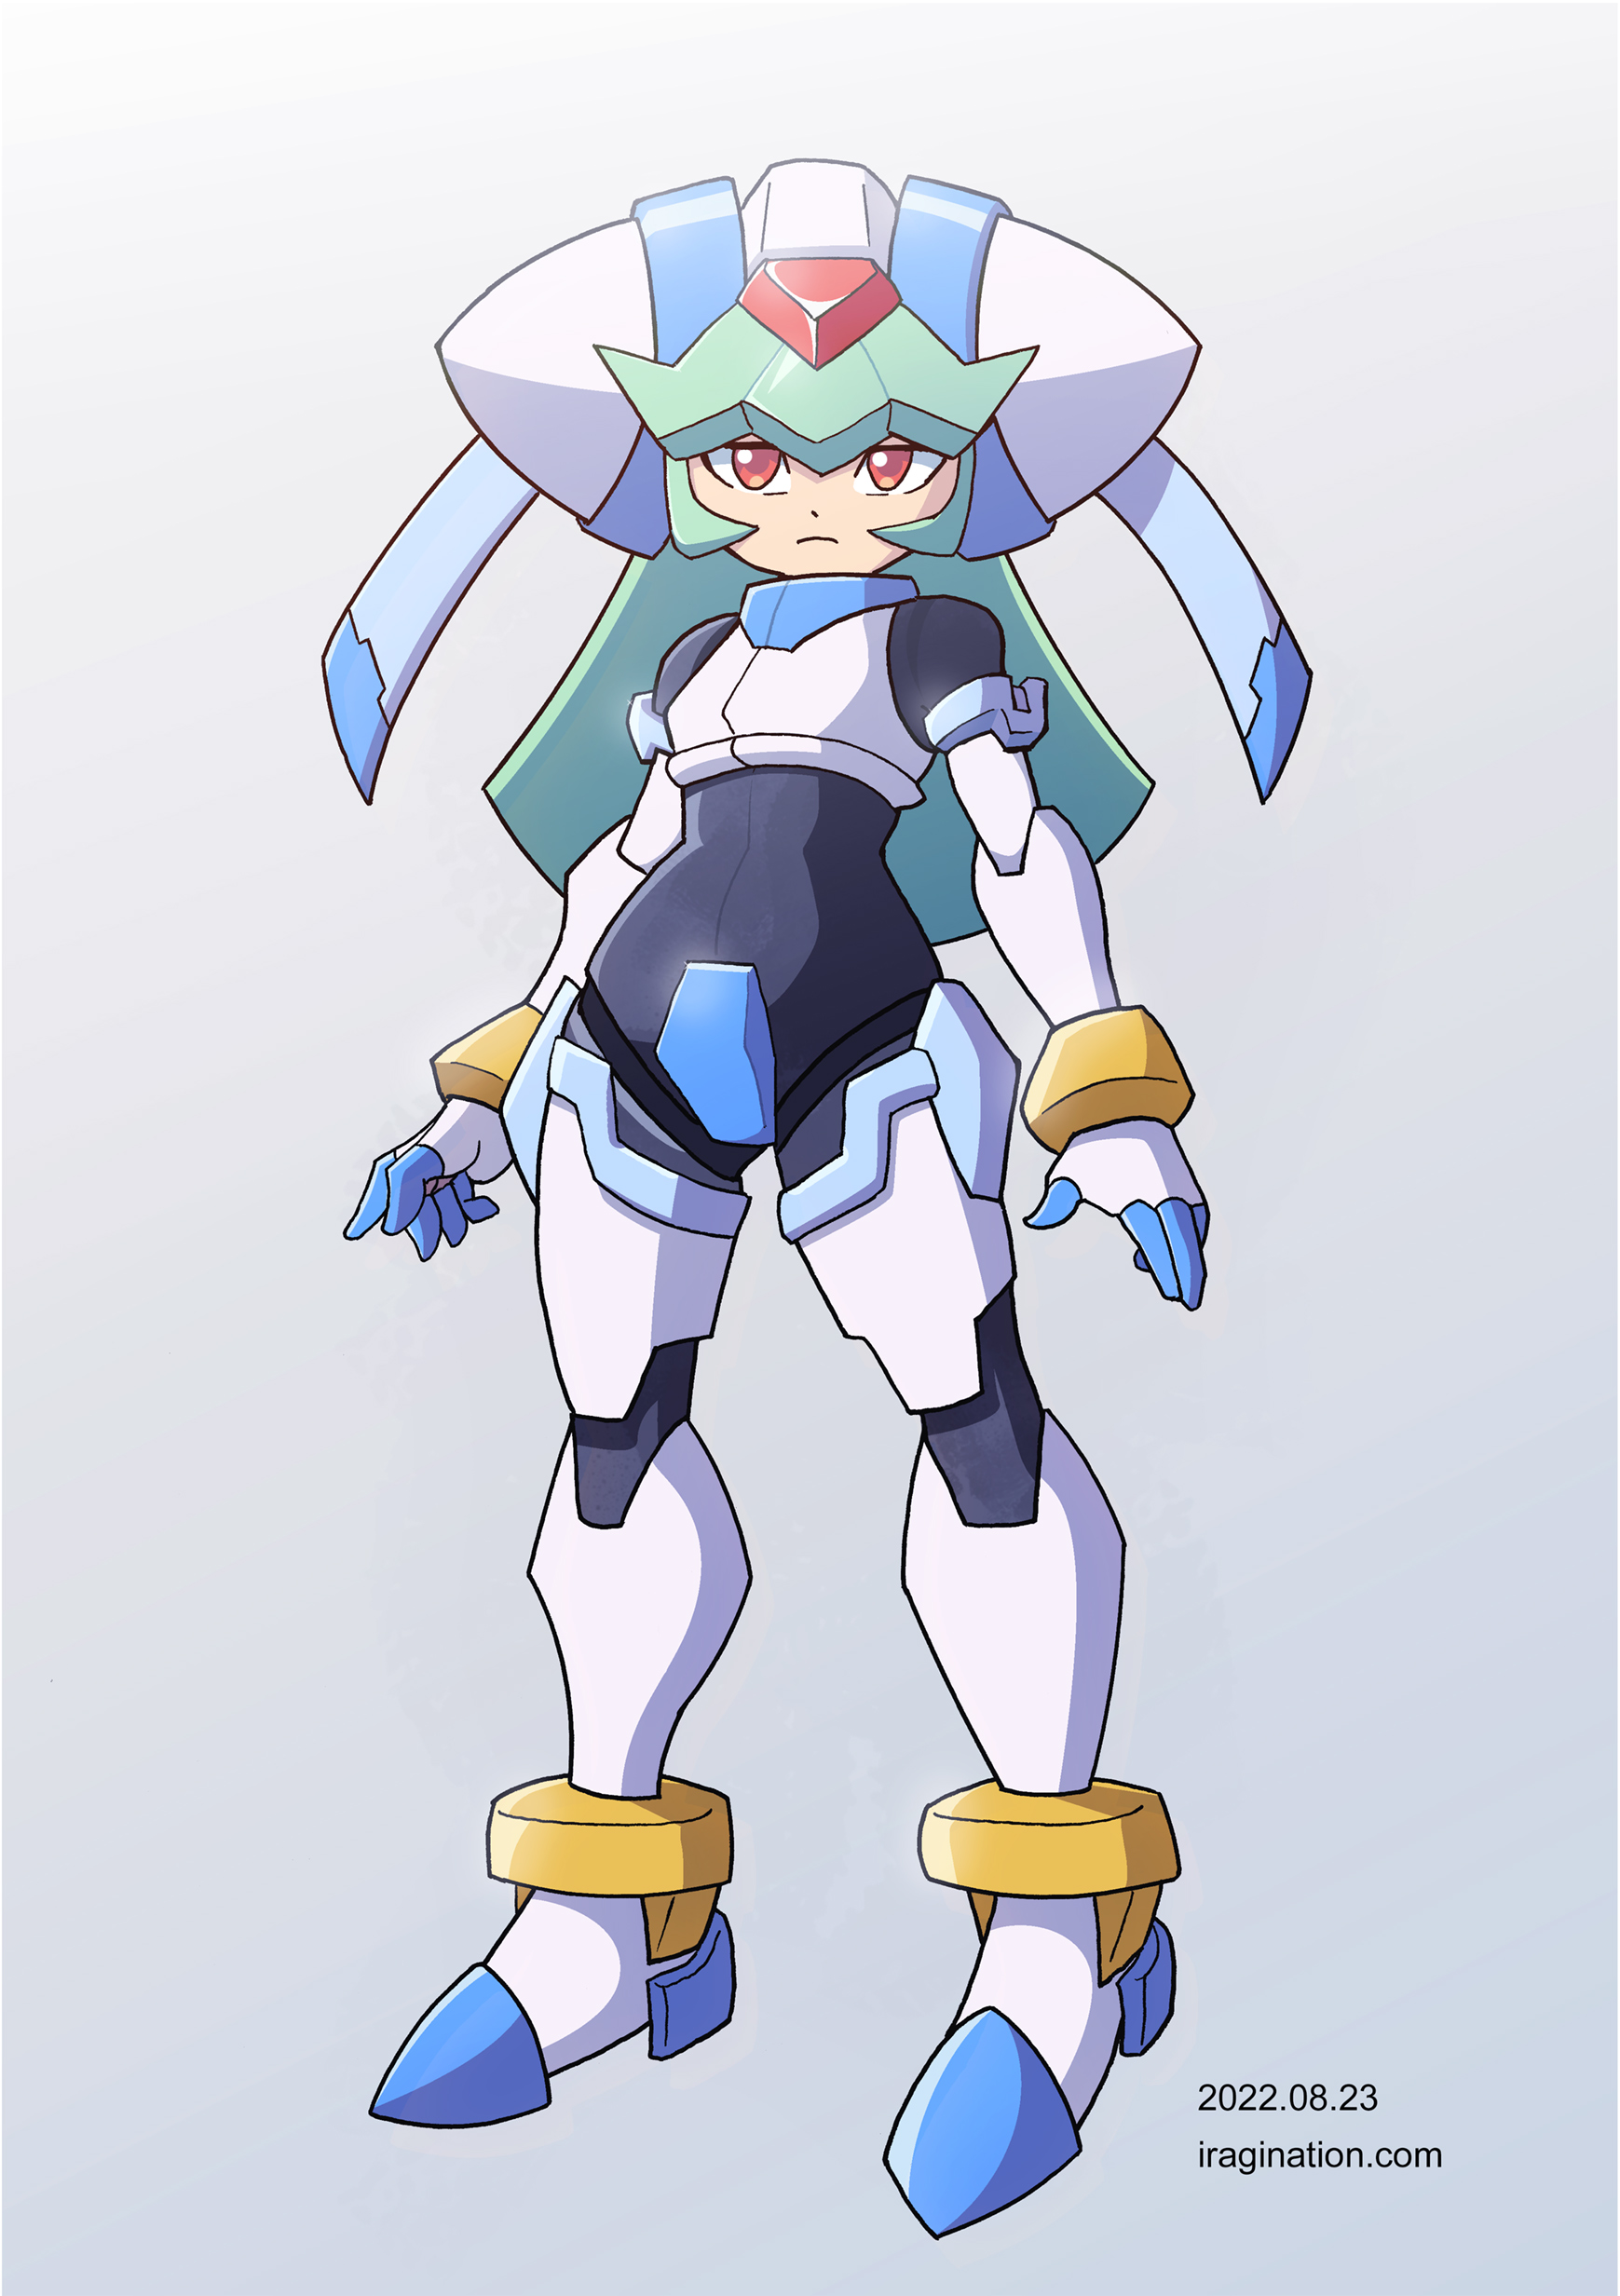 Pandora The Witch
[url=https://megaman.fandom.com/wiki/Pandora]Pandora[/url] is a character from the Mega Man ZX series.

I did this little study over the weekend based on her [b]Mega Man X DiVE[/b] 3D model, and boy she’s small. 

I did most of my playthroughs on the recent [url=https://www.facebook.com/CAPCOM.RXD/videos/1234803767338862]Mega Man ZX Advent event[/url] with her. I completely forgot about her staff and did not have time to add it later. Maybe next time. 

This was completely unplanned, but a nice exercise.

Mega Man X DiVE © CAPCOM
Keywords: pandora mega_man_zx_advent